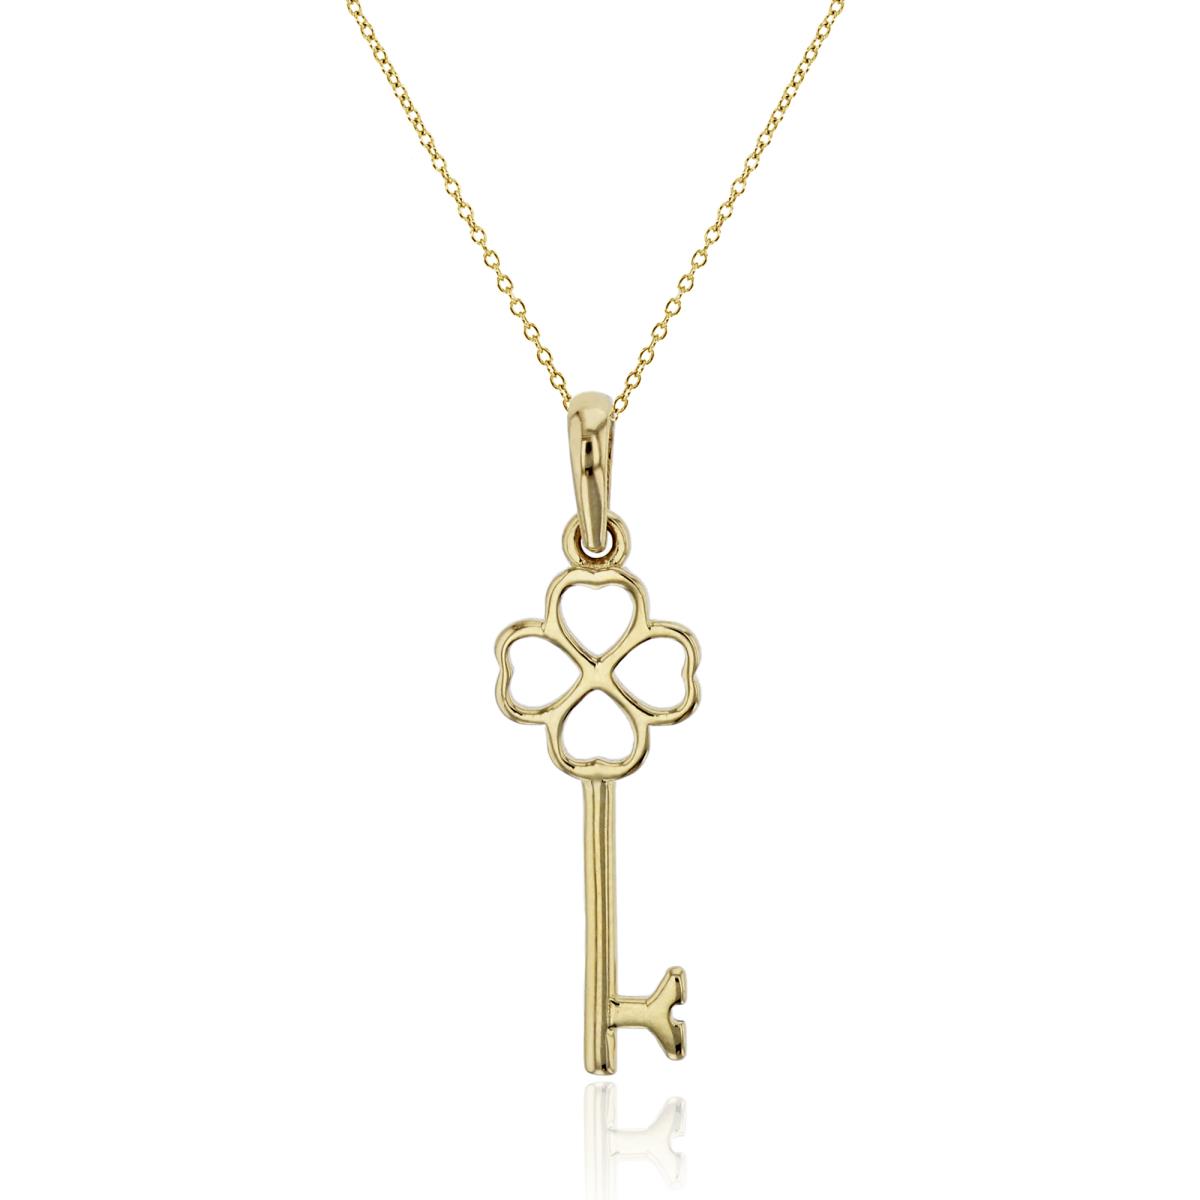 14K Yellow Gold 26x8mm Polished Clover Key Dangling 18" Necklace